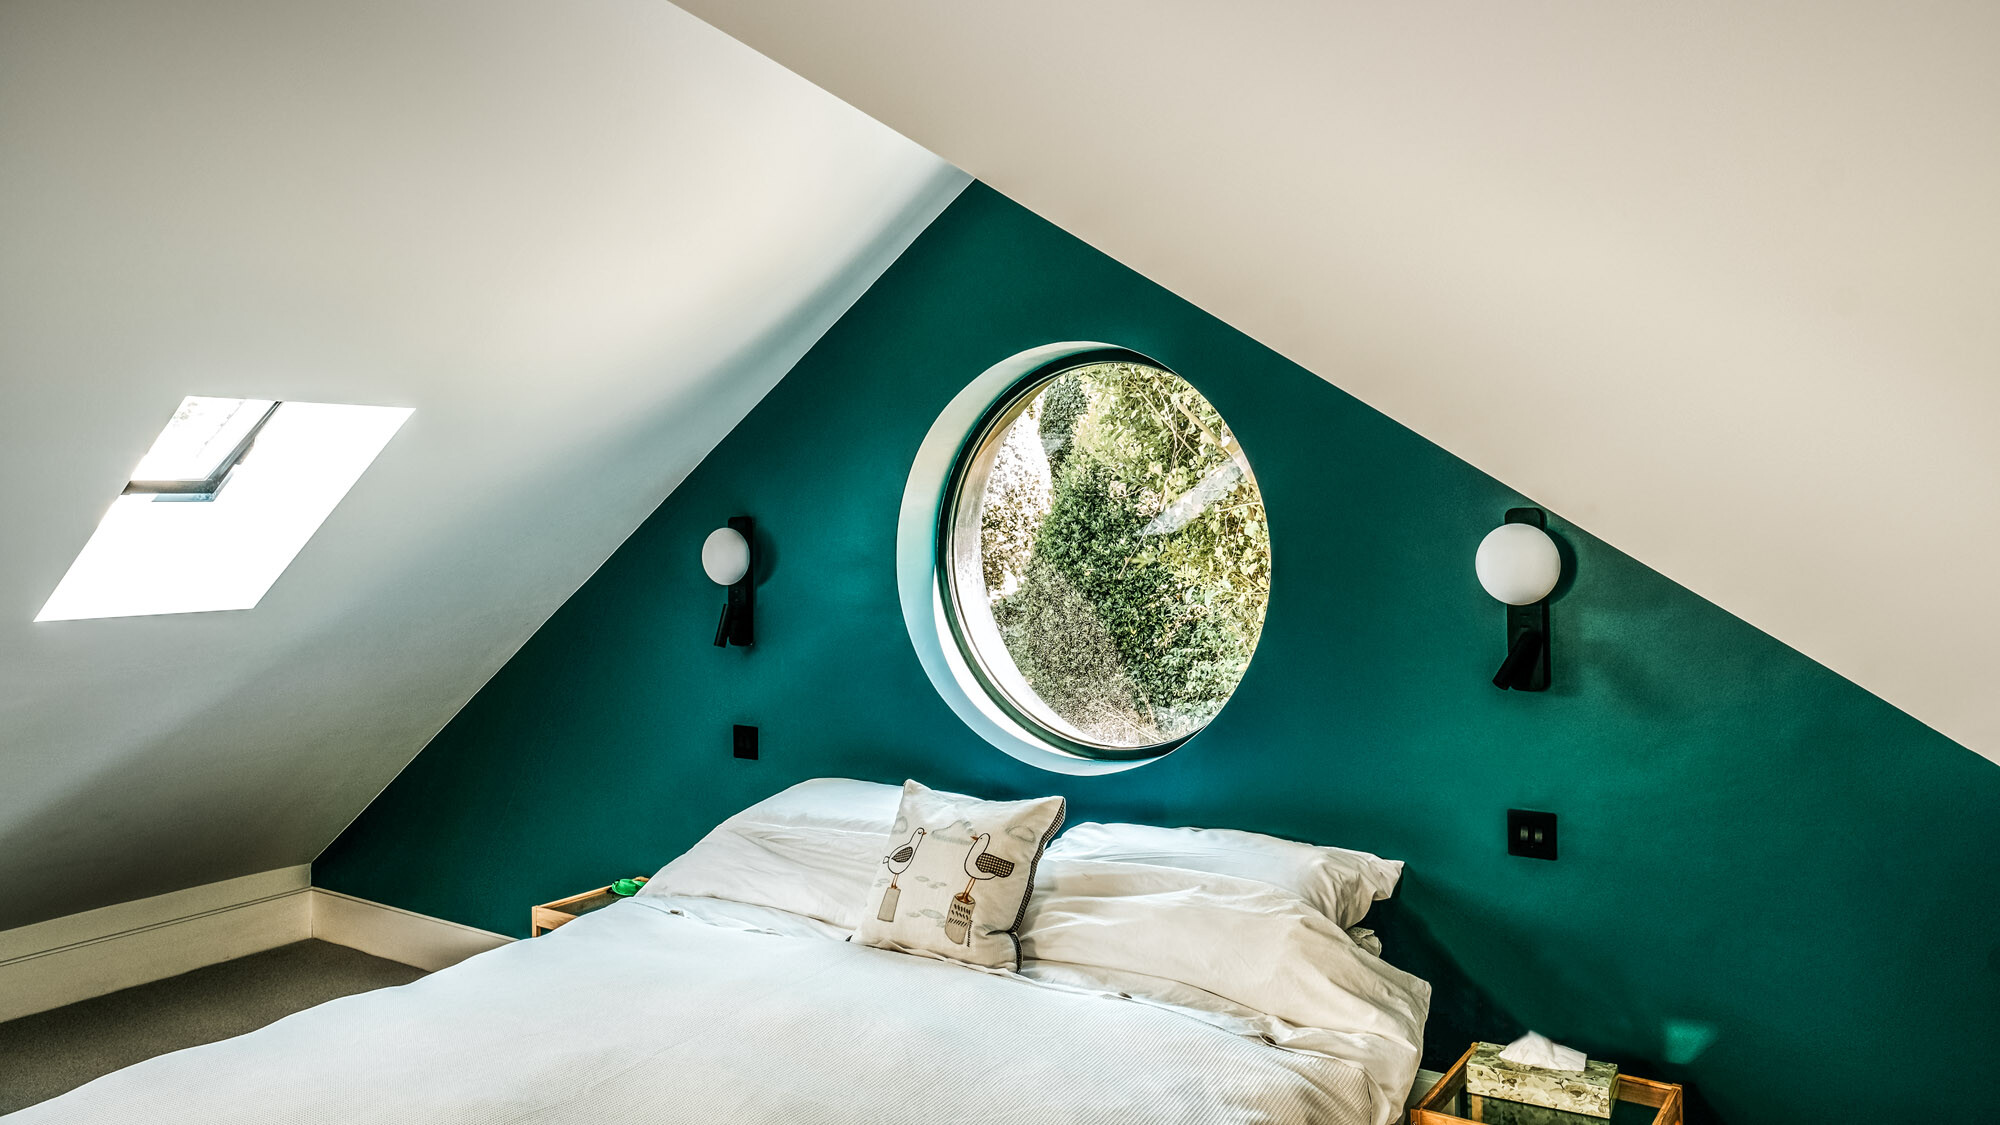 Interior view of one of the stylishly furnished bedrooms in the attic with a round window.